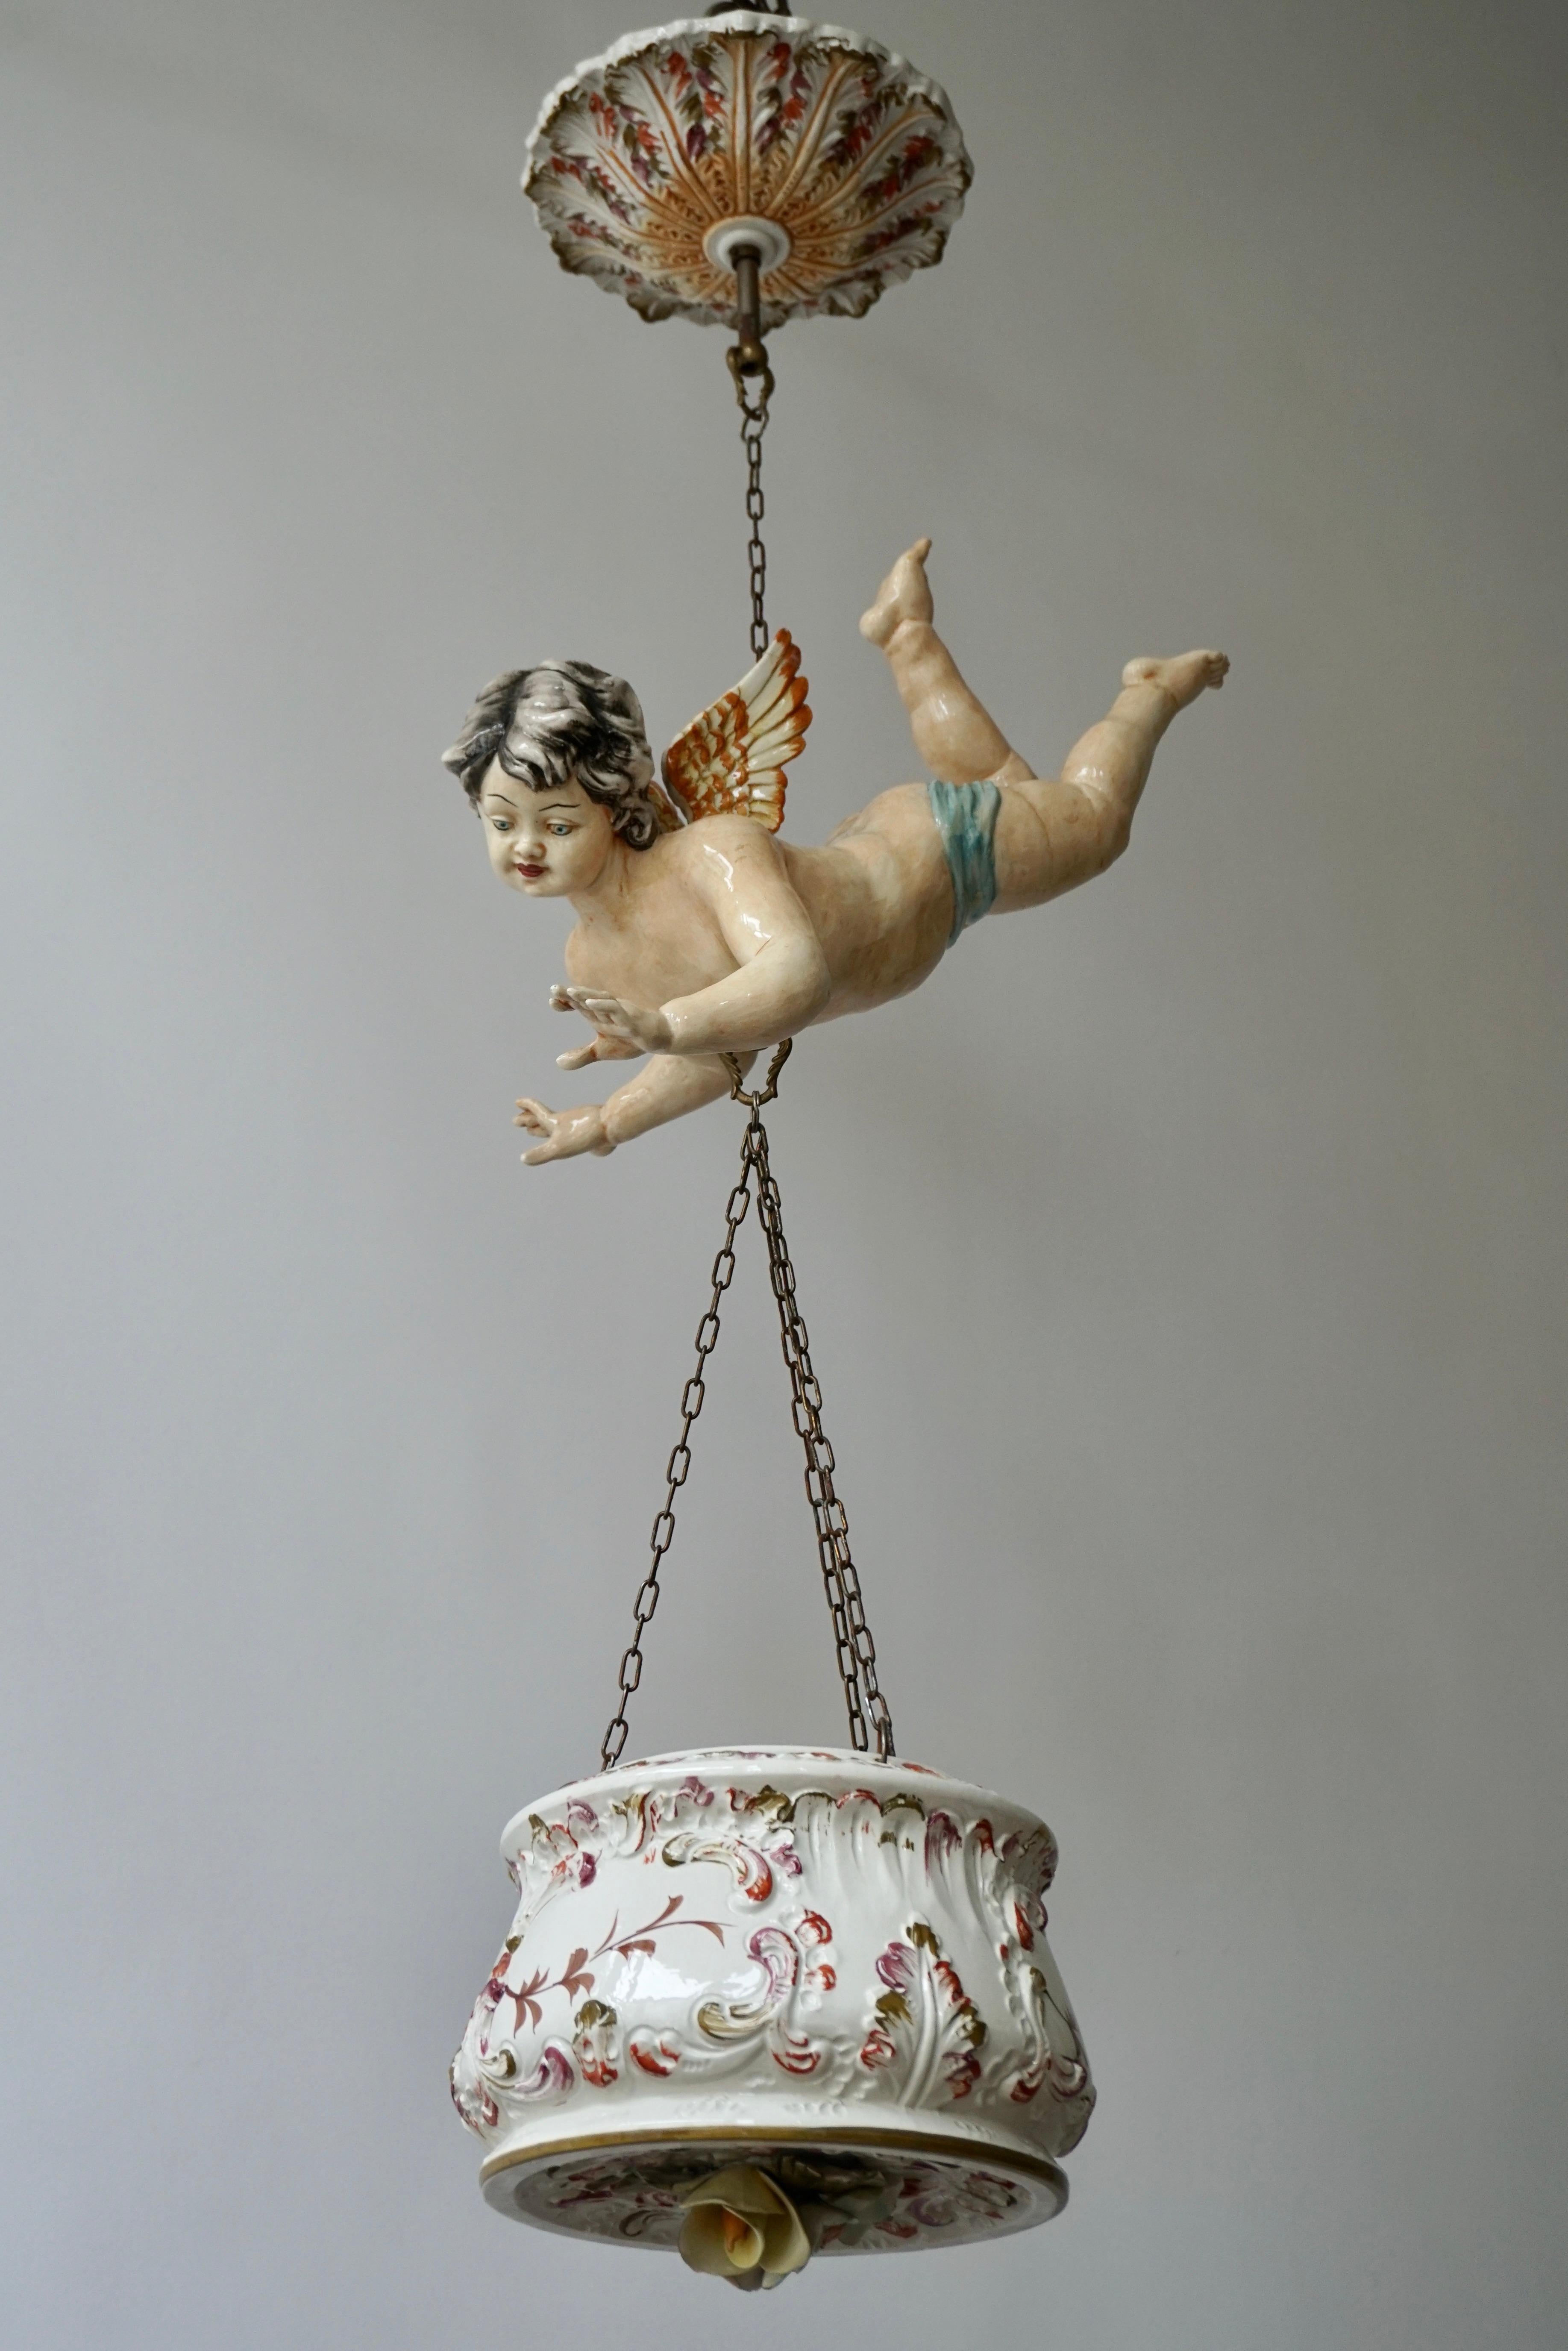 Hollywood Regency Porcelain Hanging Planter/Jardinière with Winged Putti